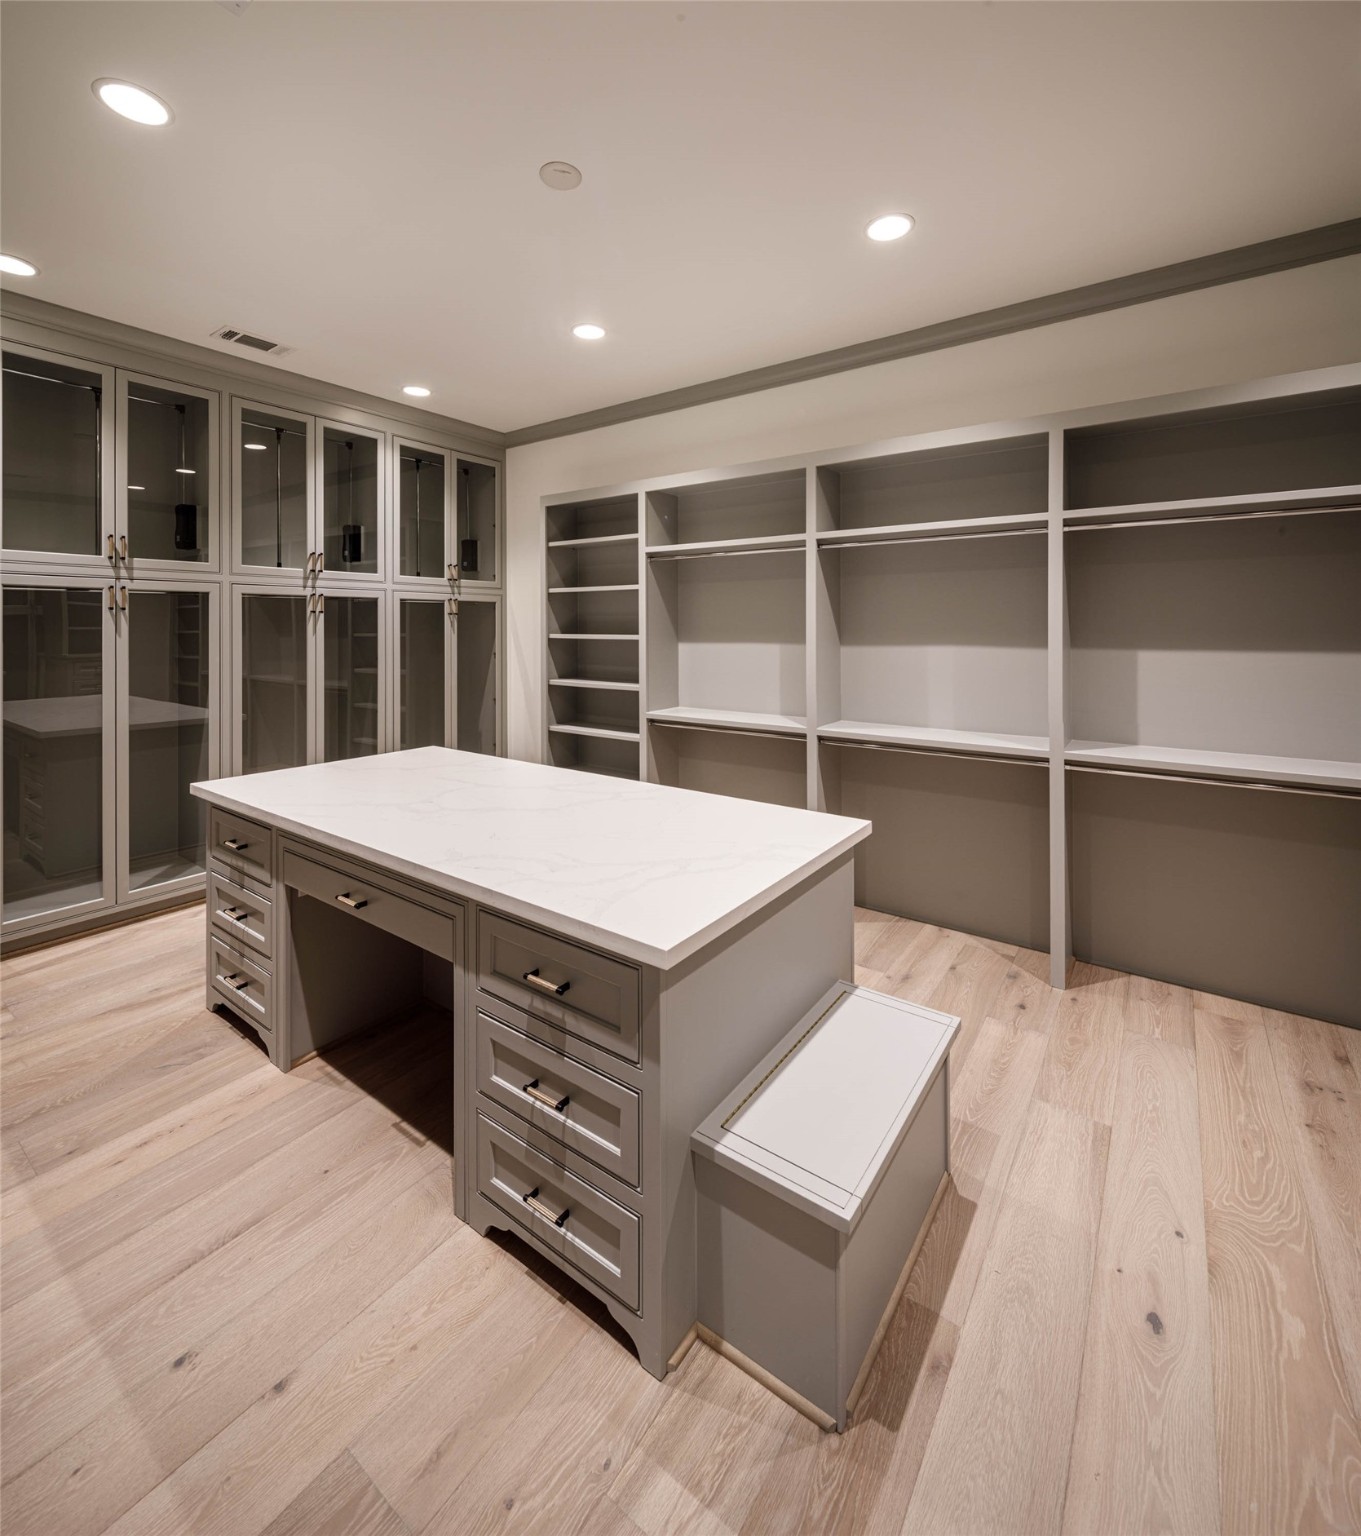 One of the Two primary dressing areas with engineered white Oak wood floors, furniture quality cabinetry, custom packing island with built-in storage, glass front cabinets with hanging rods, boutique style mirror and concealed security safety box